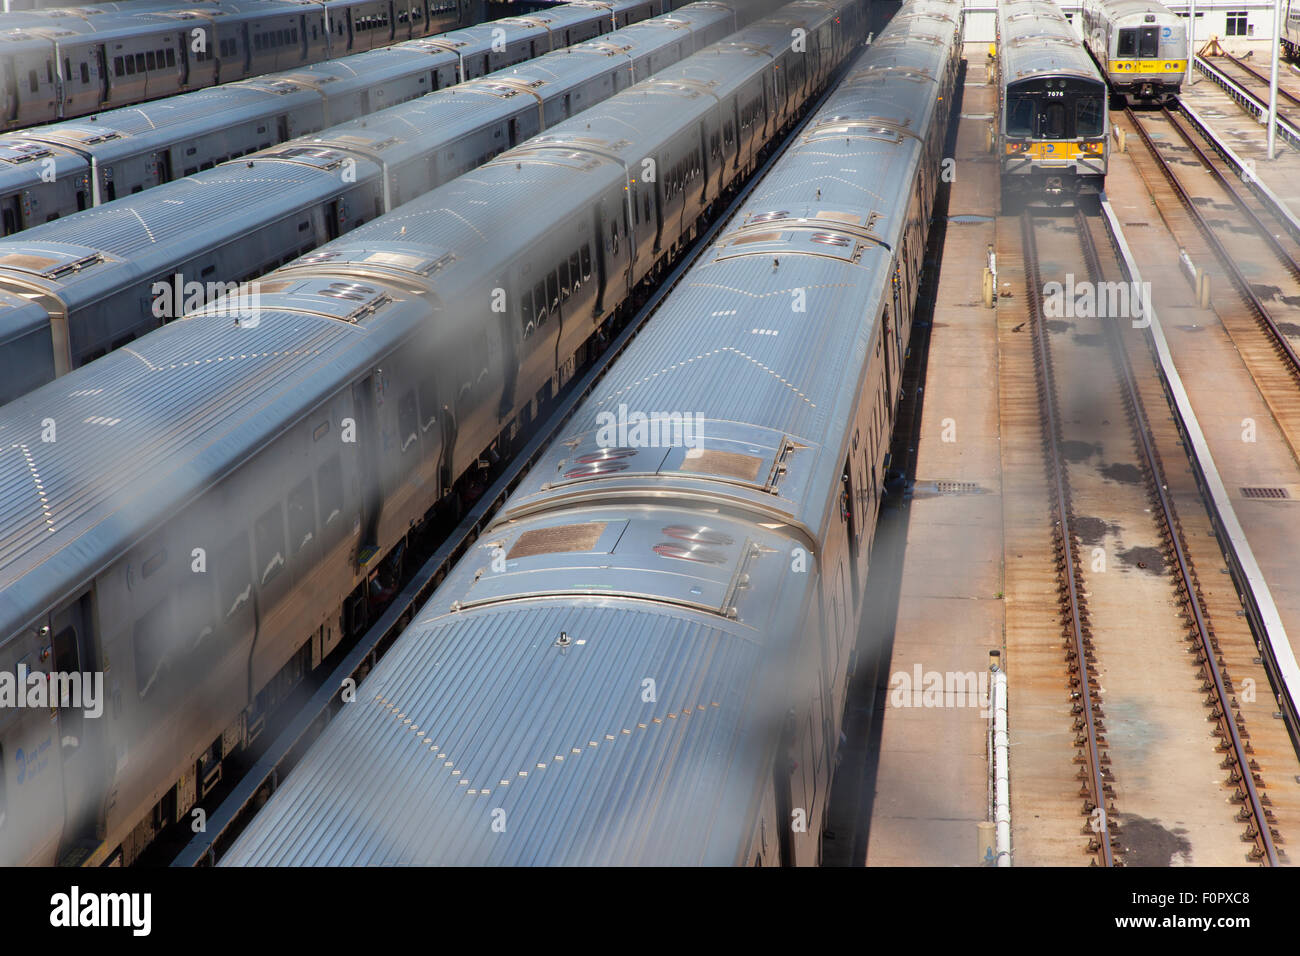 USA, New York State, New York City, Manhattan, Midtown, MTA trains parked in the West Side Yard. Stock Photo